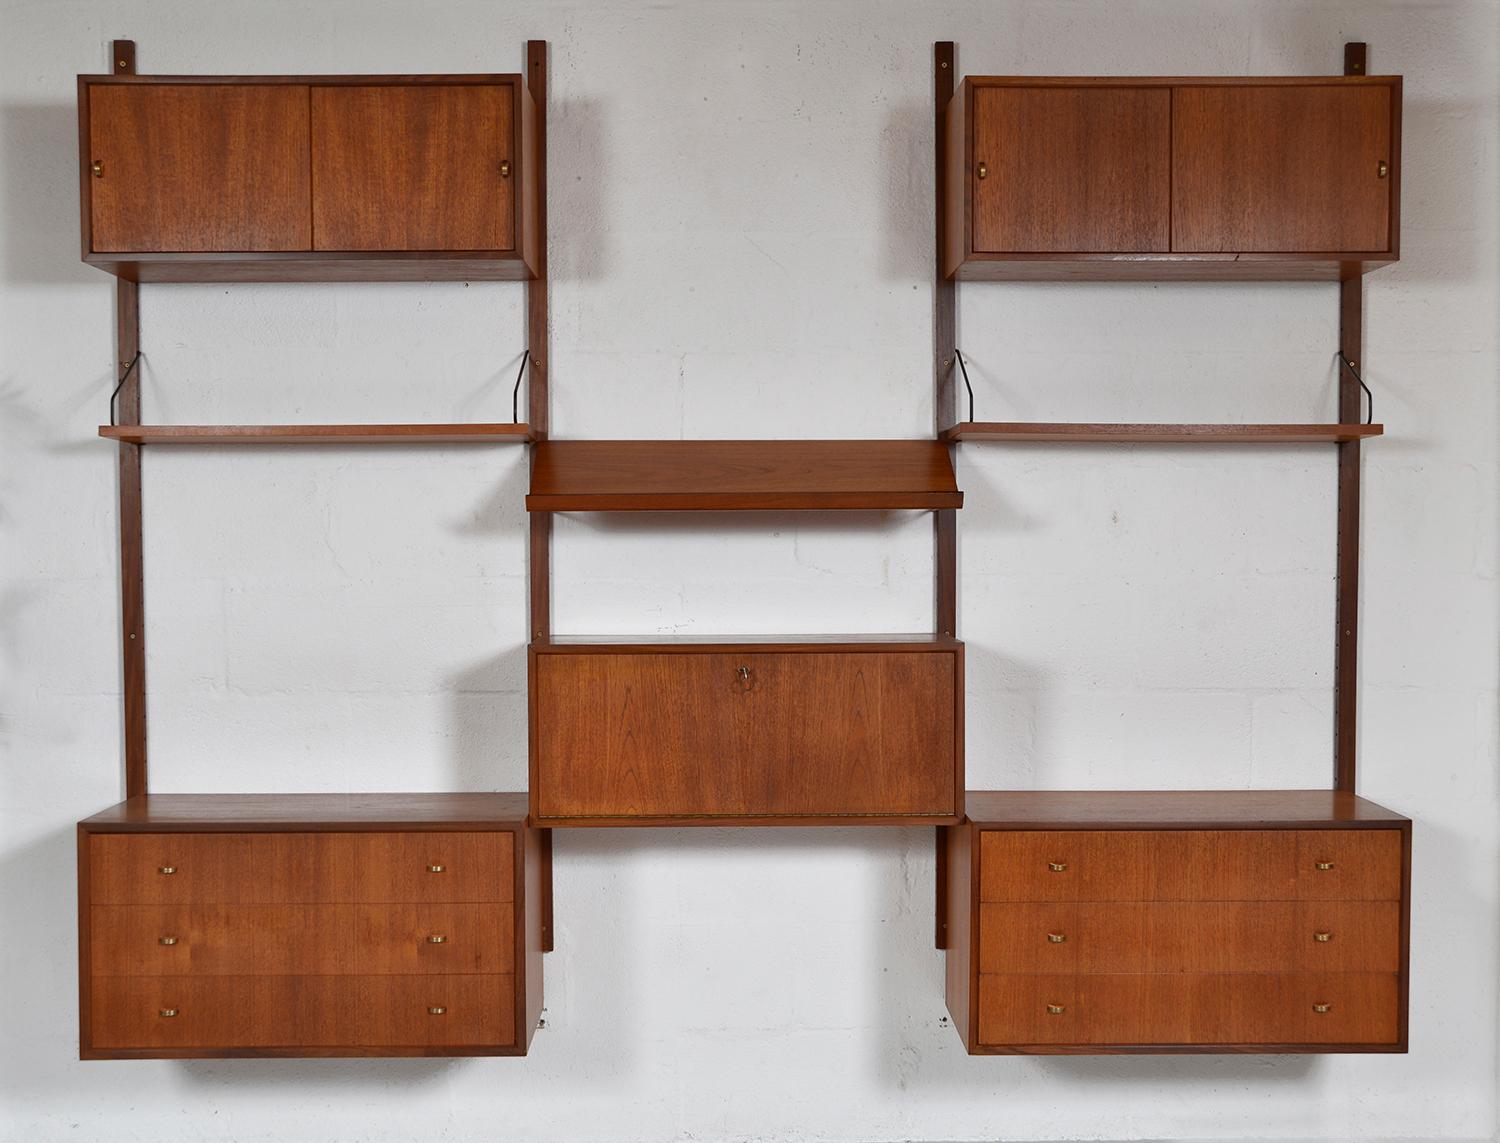 This highly versatile and functional “Royal System” was designed by Poul Cadovius in 1948. This particular piece is quintessentially Mid-century Modern being the first generation with orange-slice brass handles. 
Simply hung on brass pins and